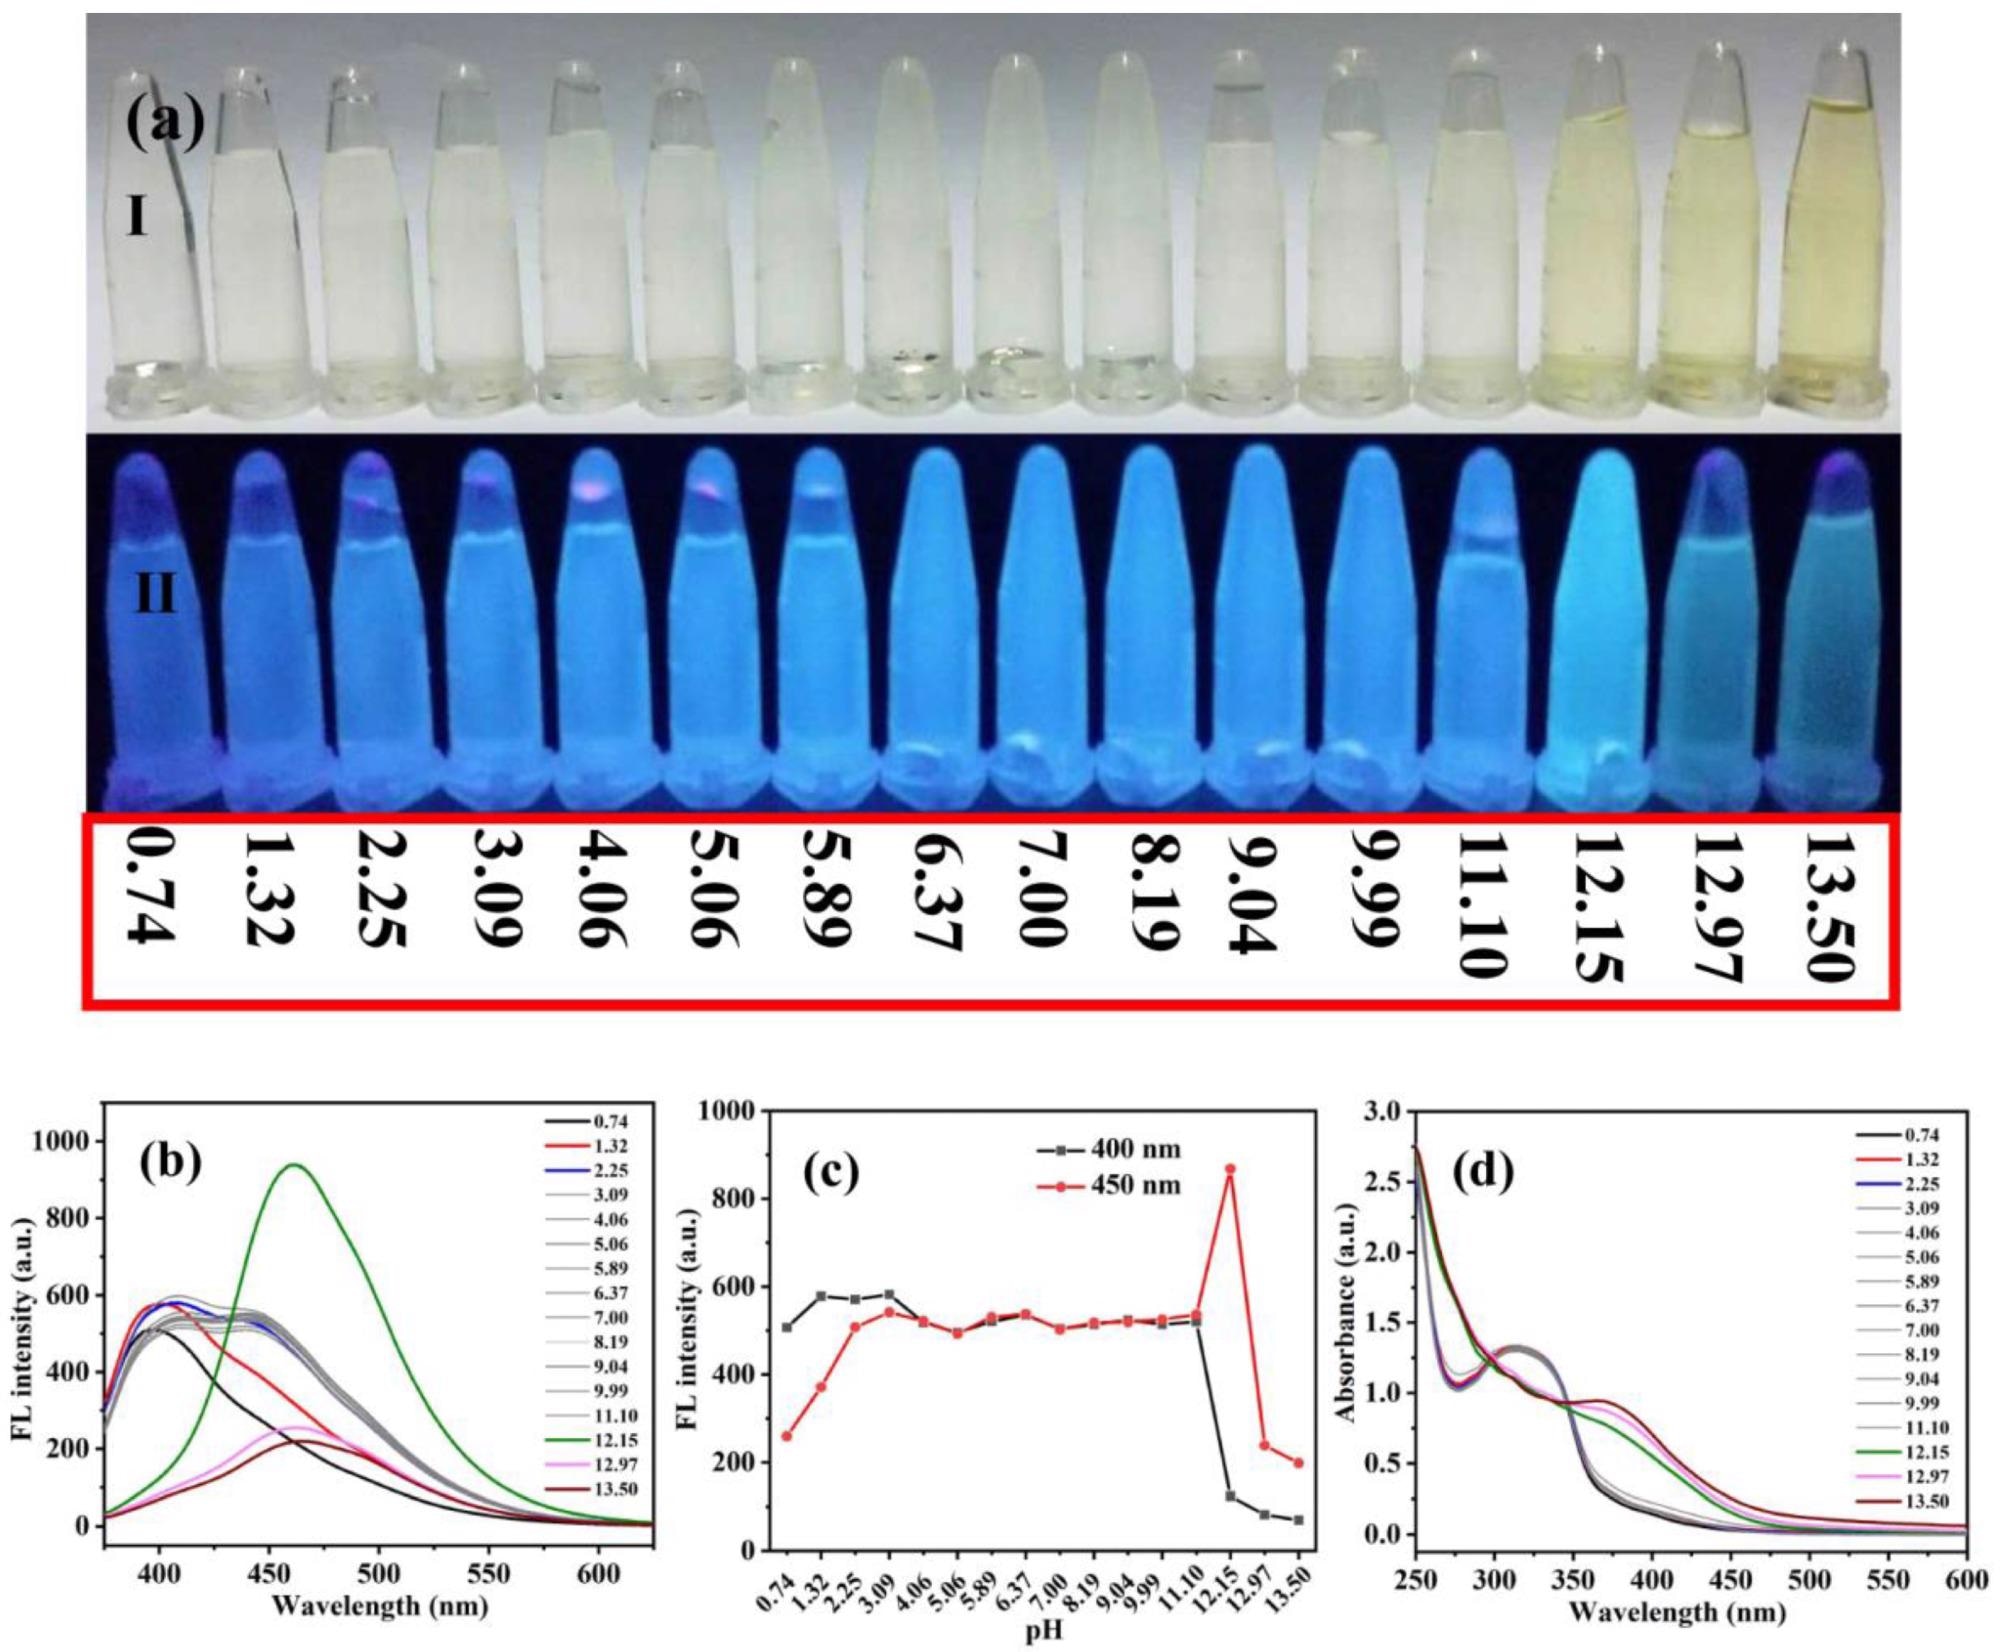 (a) Photographs of Ag-CDs in aqueous solutions at various pH values under daylight (a-I) and UV light (365 nm, a-II). Fluorescent emission spectra at ?EX 360 nm (b), fluorescent intensity probed at 400 and 450 nm (c), and absorption spectra (d) of Ag-CDs detected at various pH values.